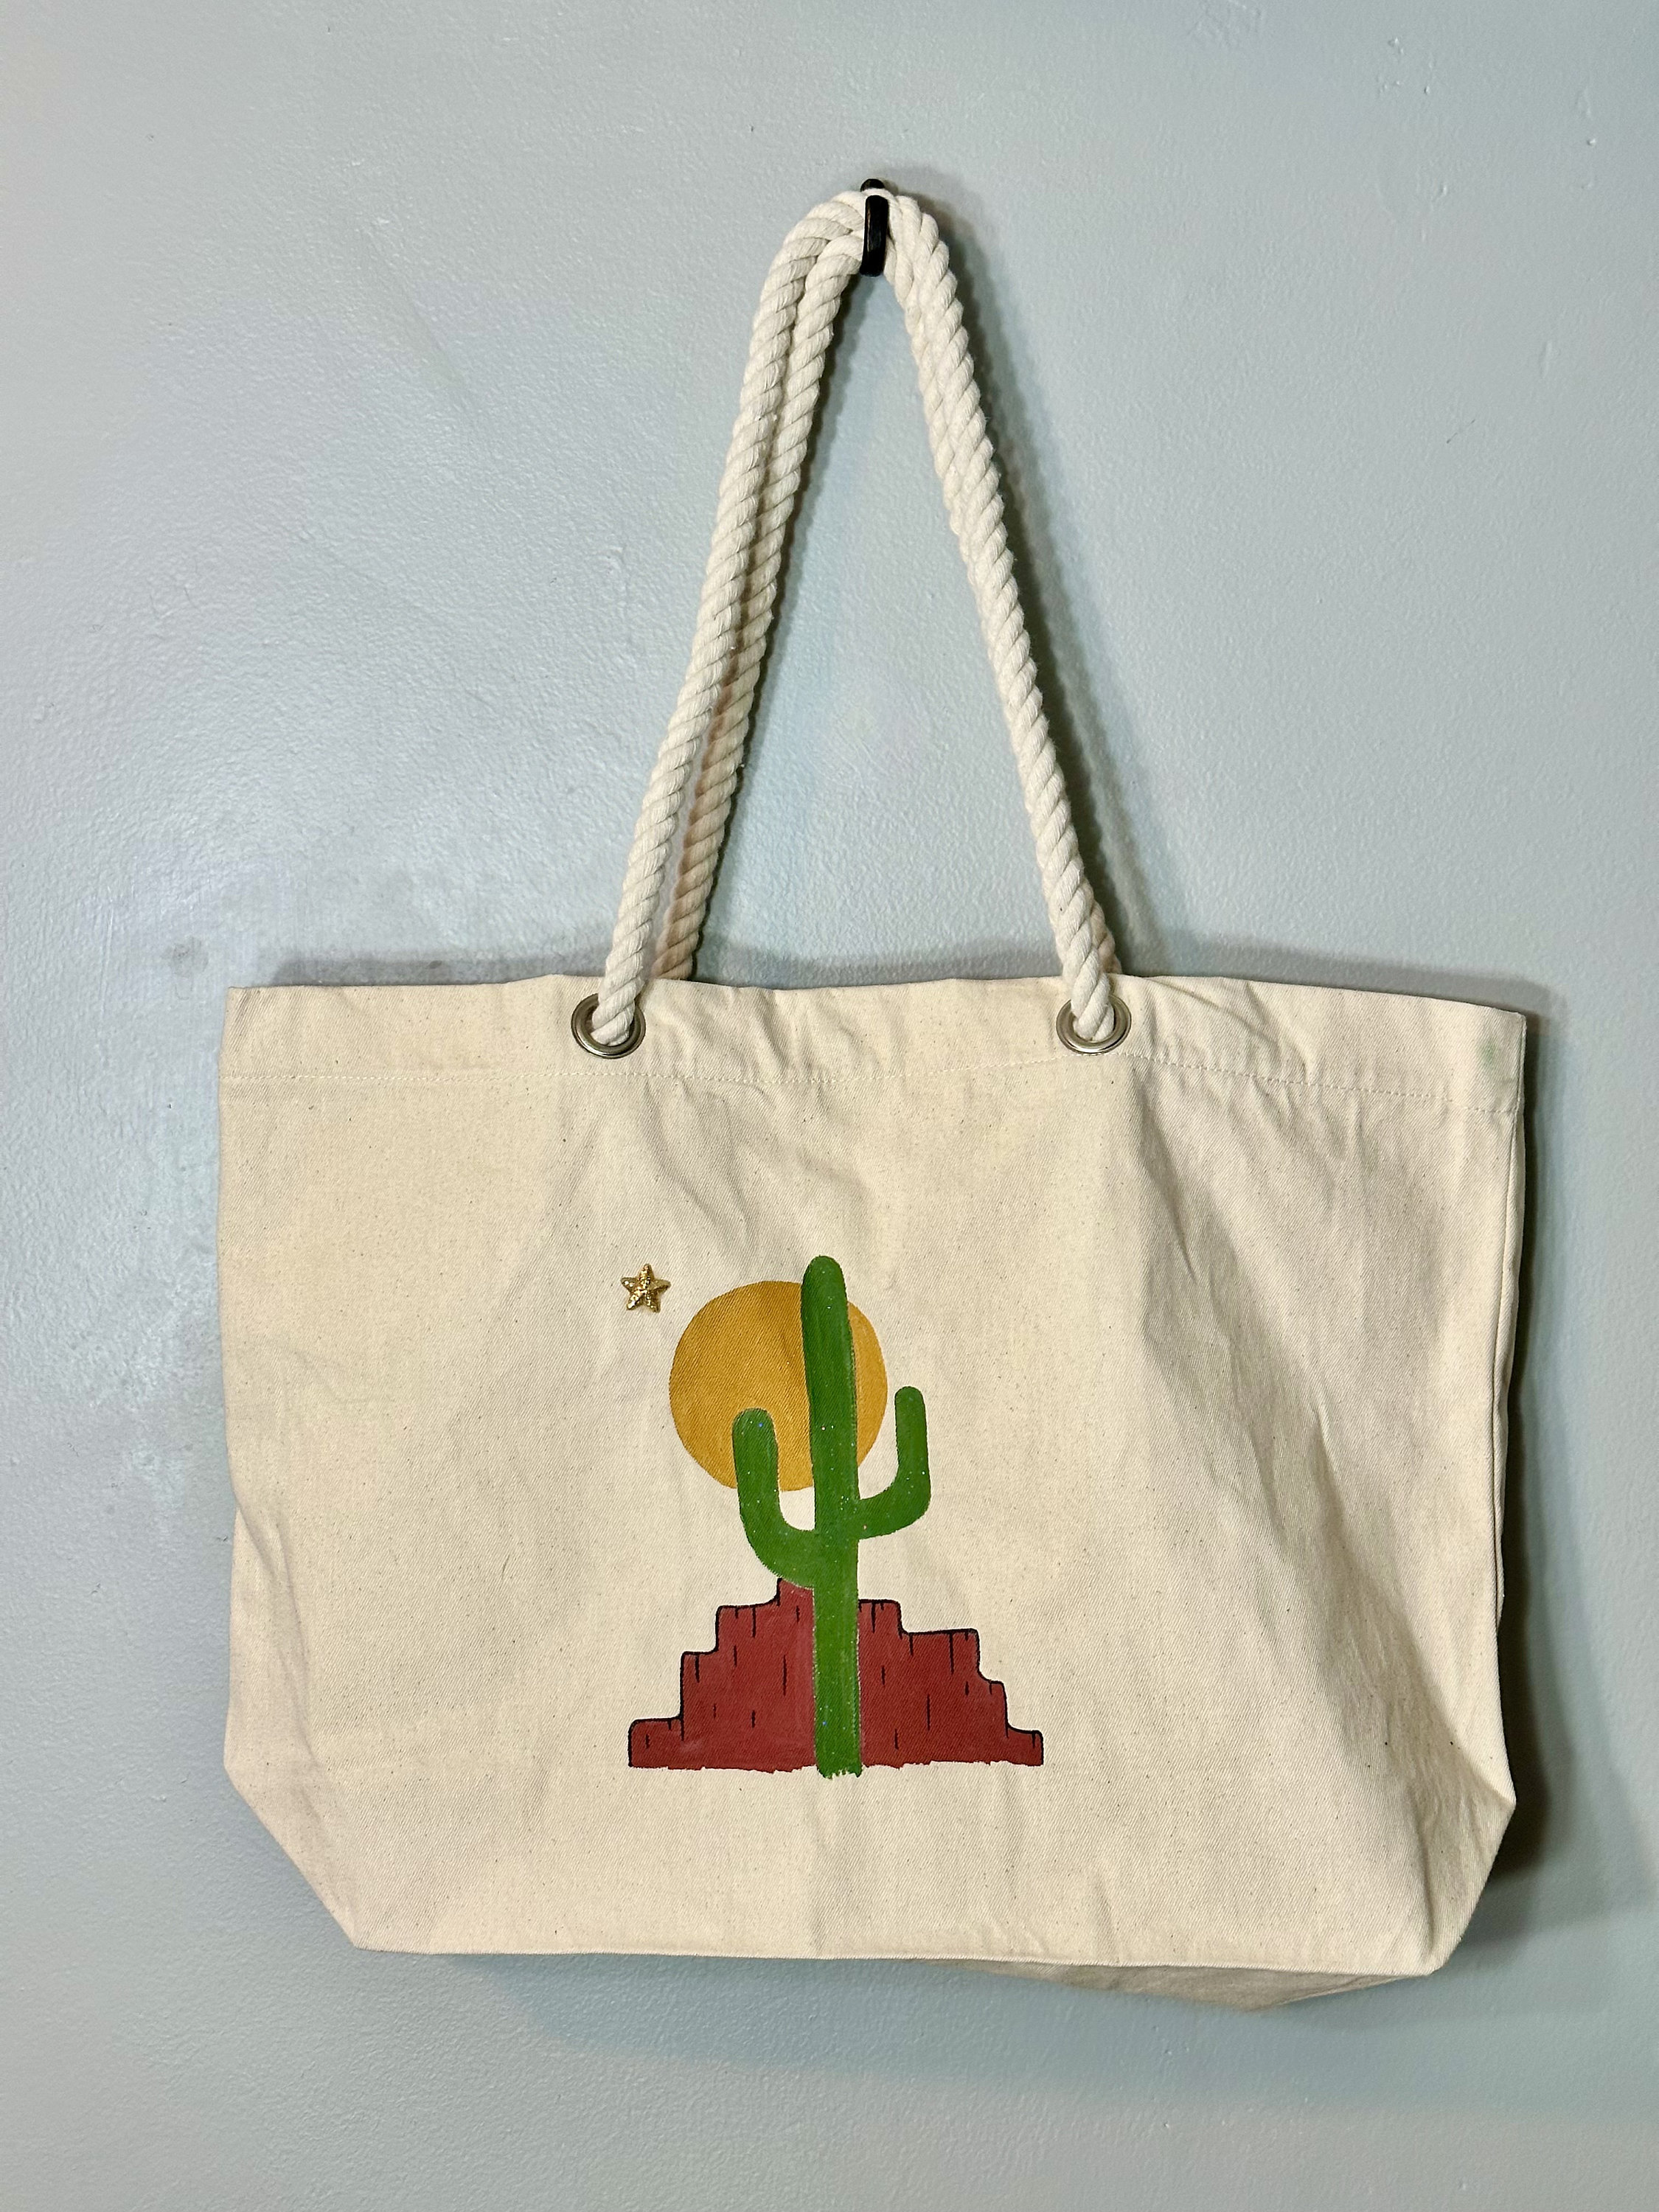 Sedona Tote Bag Natural Canvas Tote Bag, Reusable Shopping Bag -   - The Voice of Sedona and The Verde Valley